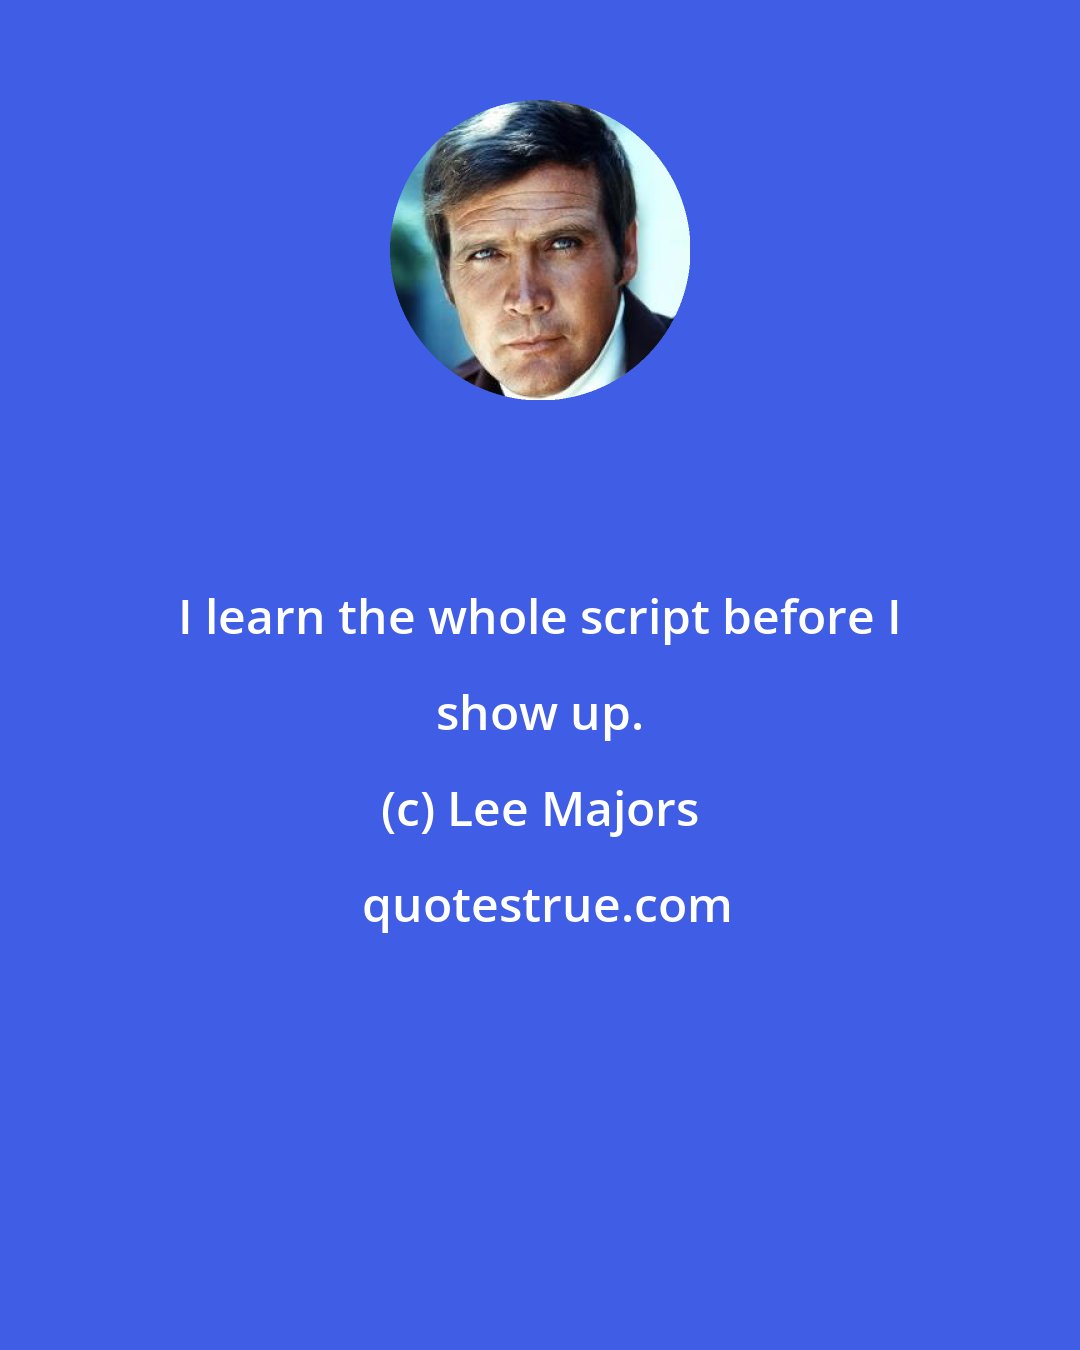 Lee Majors: I learn the whole script before I show up.